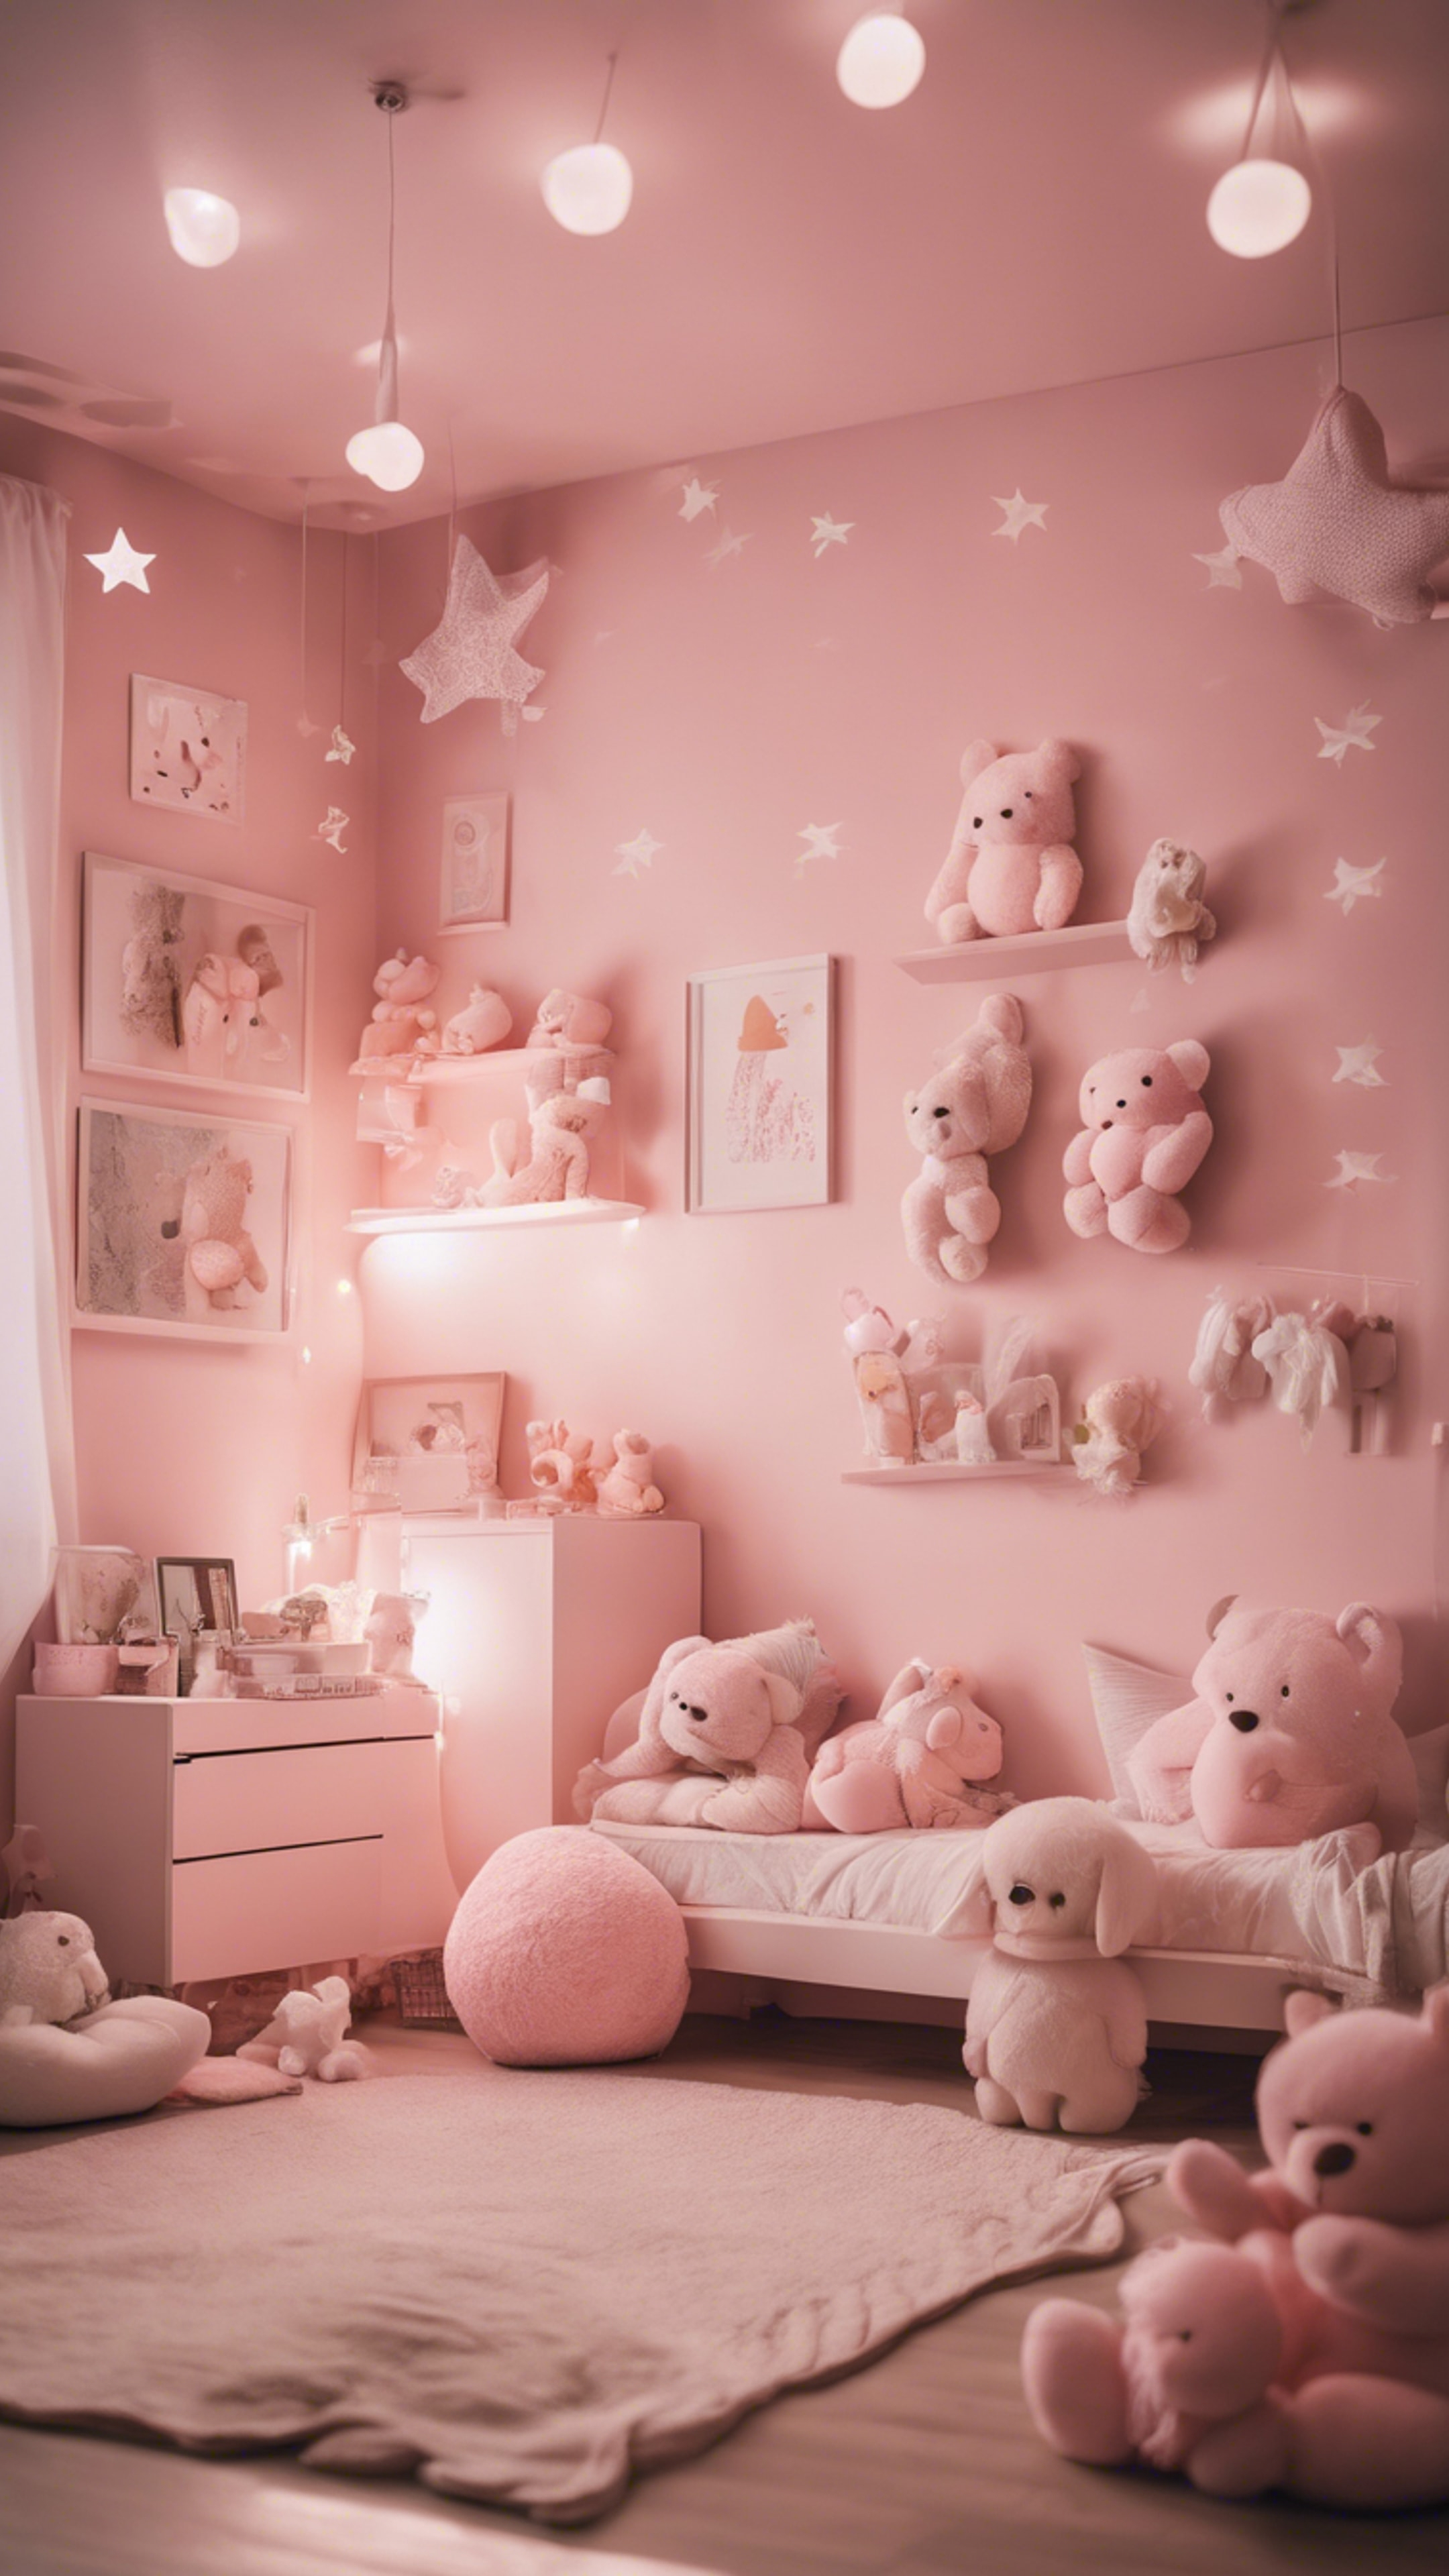 A child's bedroom designed in light pink Kawaii theme, with fluffy stuffed animals and stars. วอลล์เปเปอร์[1c682dae9a5849159ddf]